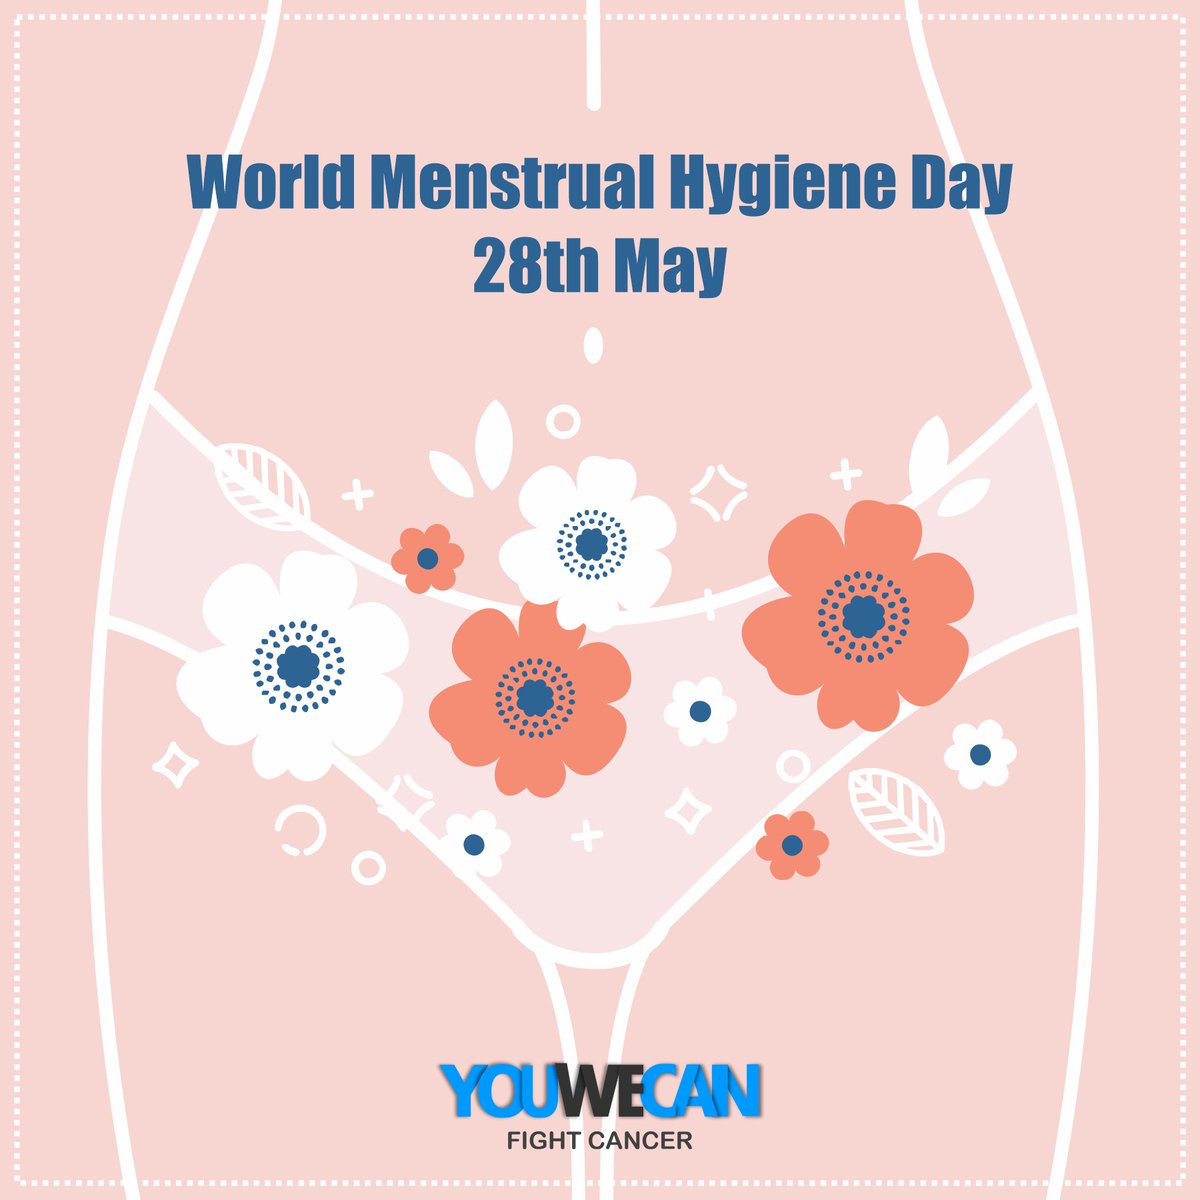 Did you know that about 60,000 women die of cervical cancer every year in India, 2/3rd of those deaths are caused due to poor #MenstrualHygeine. This #MenstrualHygieneDay, reach out to your doctor & understand good Menstrual Hygiene practices. 
#YouWeCan #CervicalCancer #Cancer